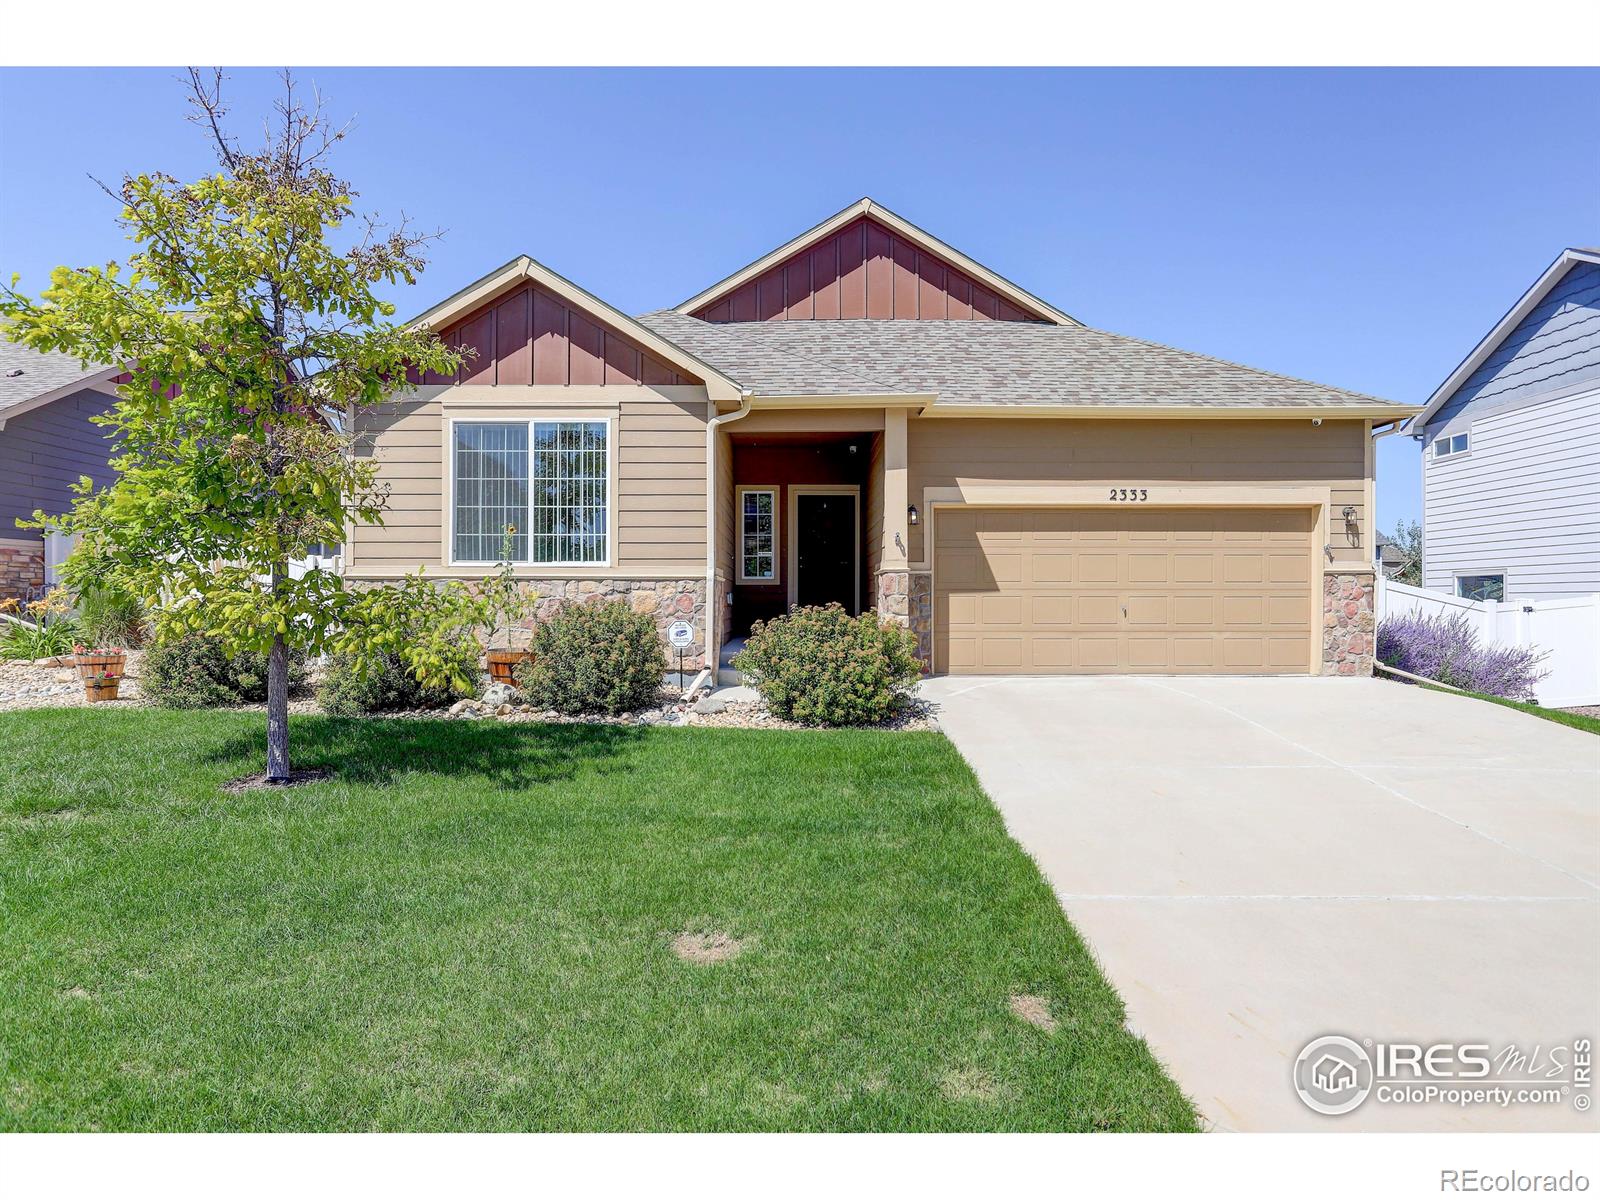 2333  76th Ave Ct, greeley MLS: 456789994079 Beds: 3 Baths: 2 Price: $459,900